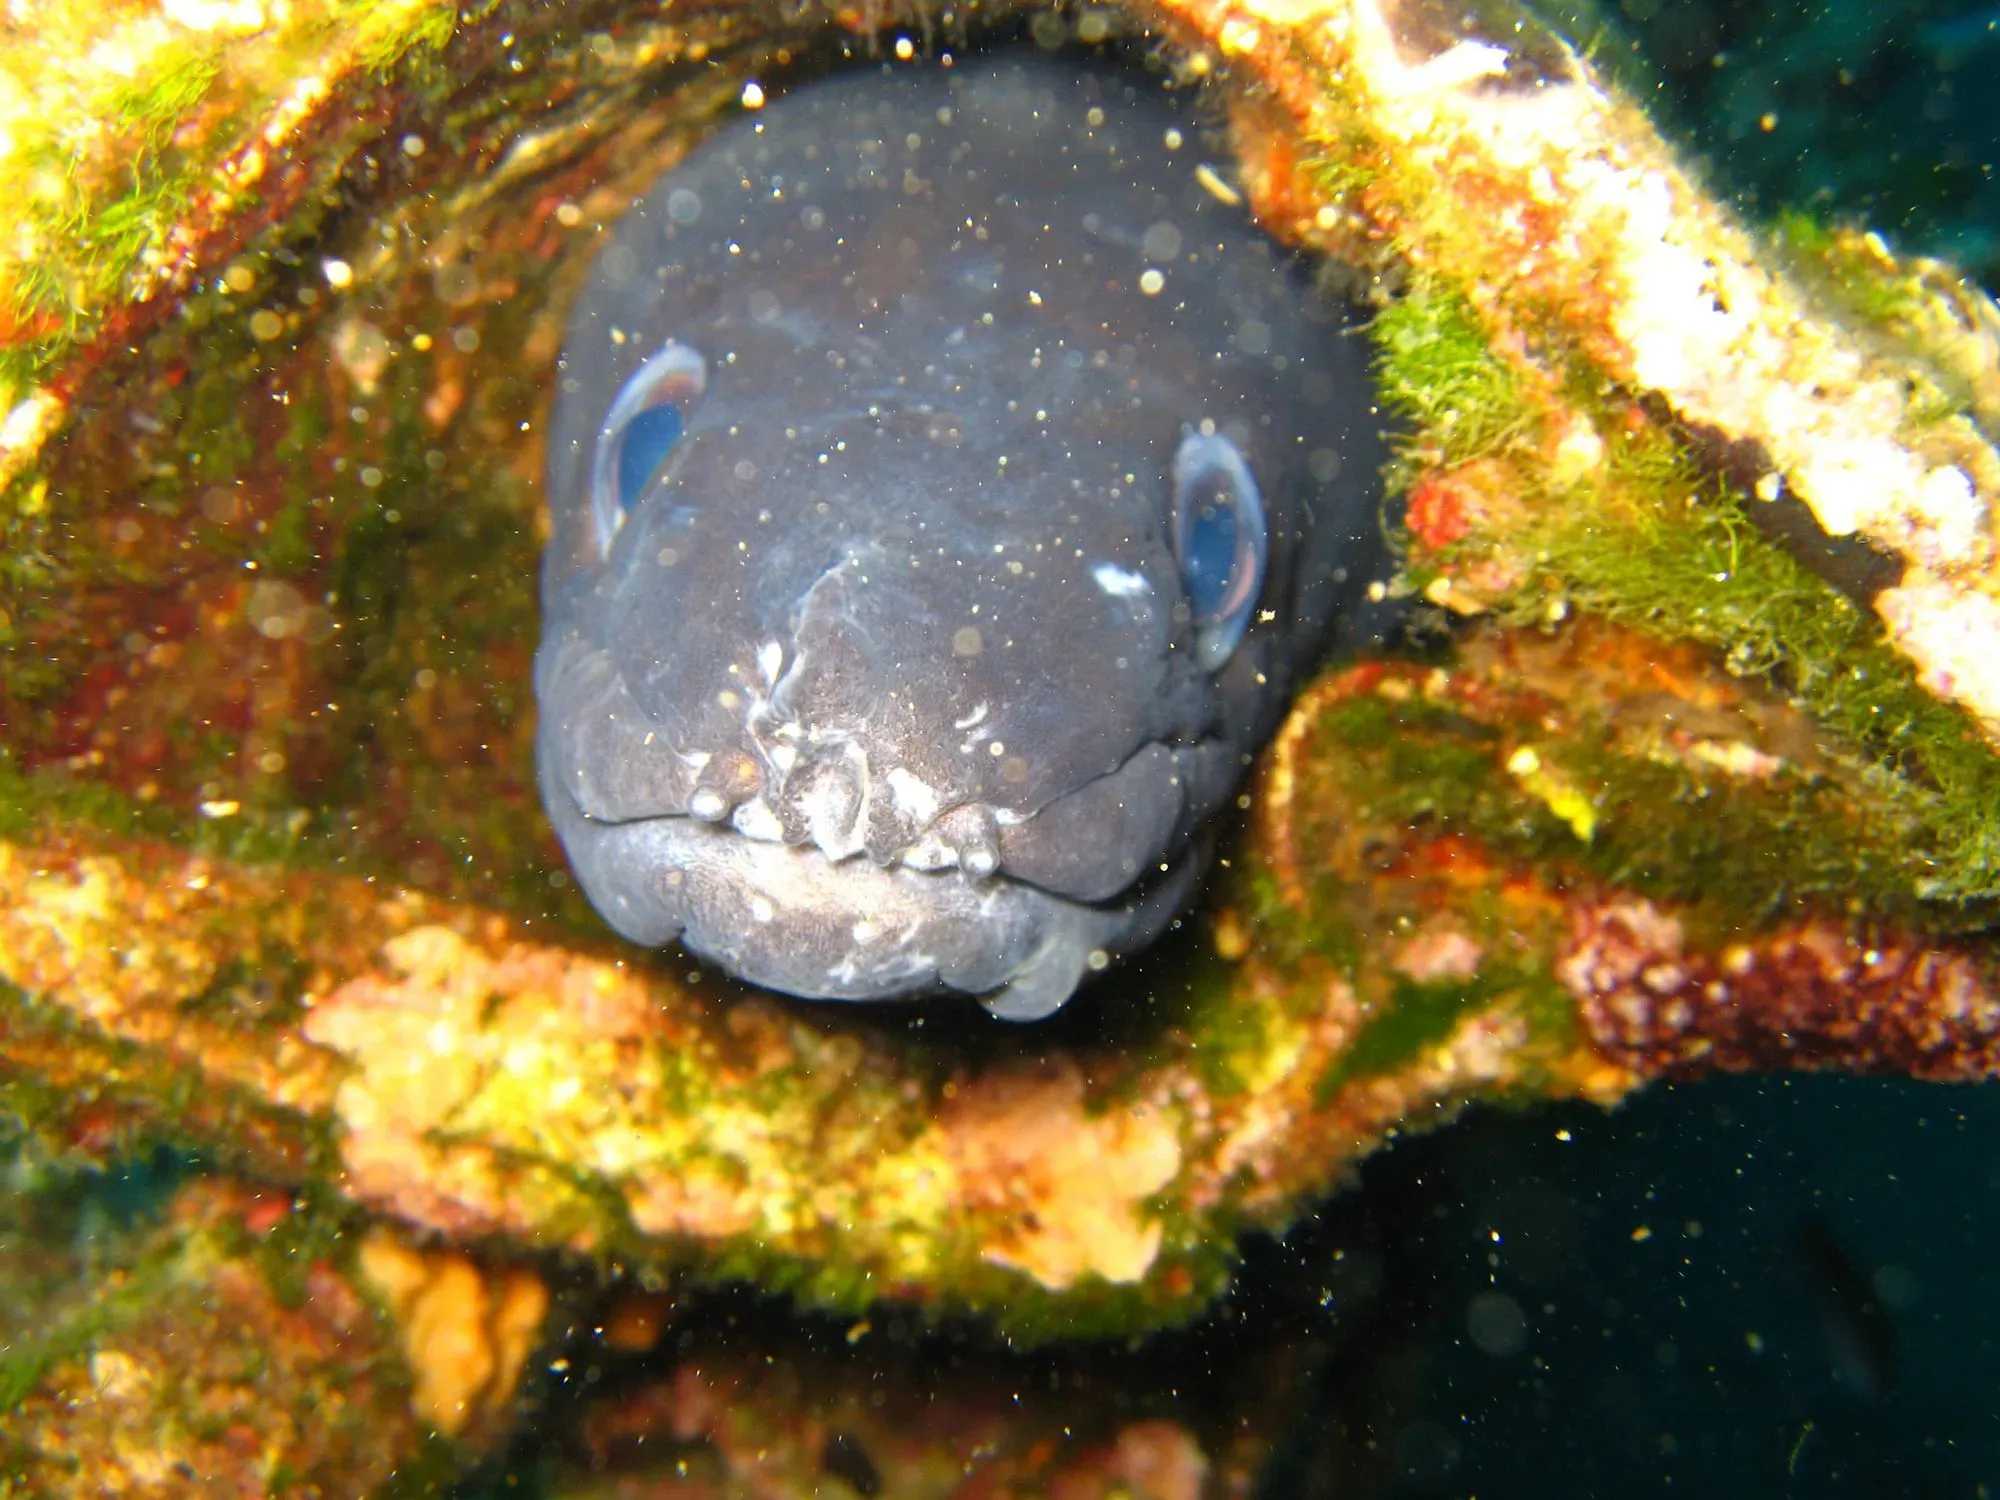 Conger eels are found in abundance in both Africa and Europe.